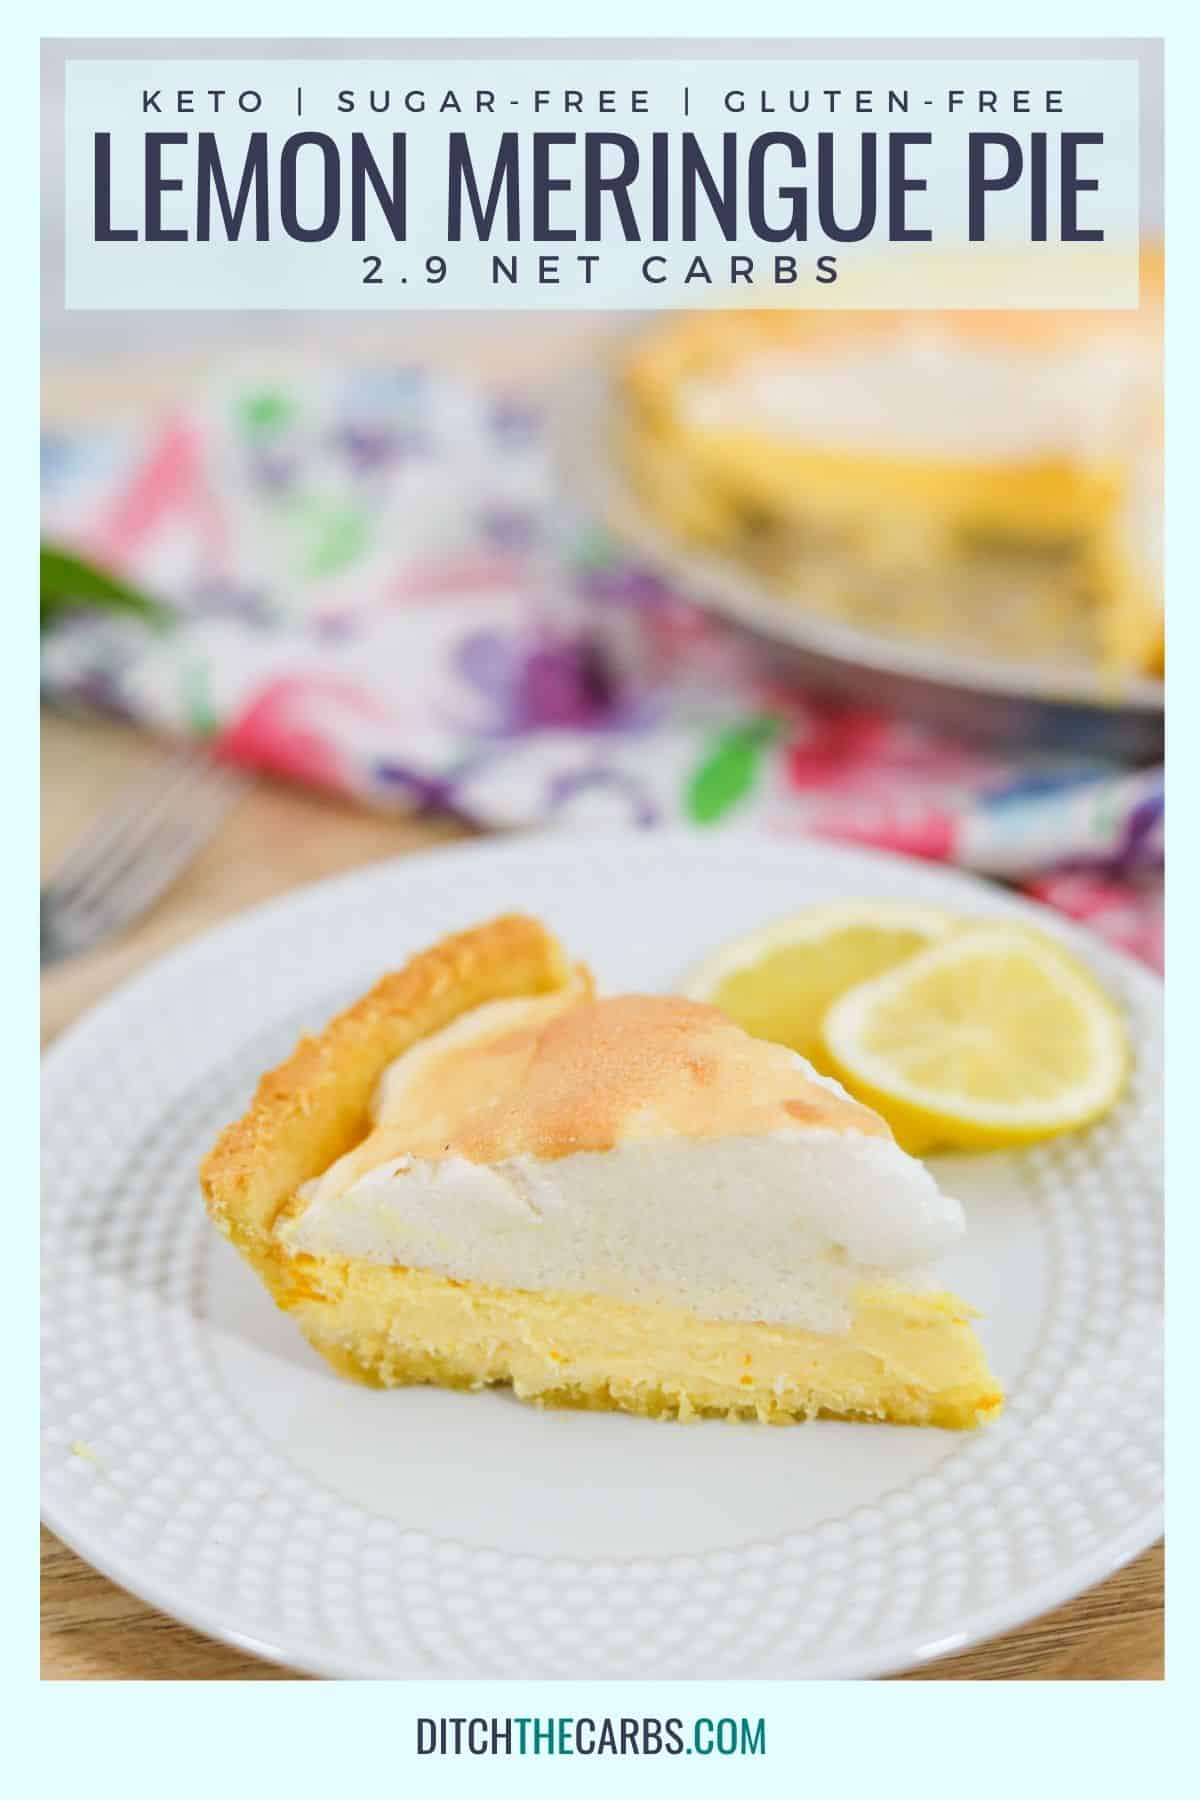 keto lemon meringue pie being eaten with a fork and a white plate